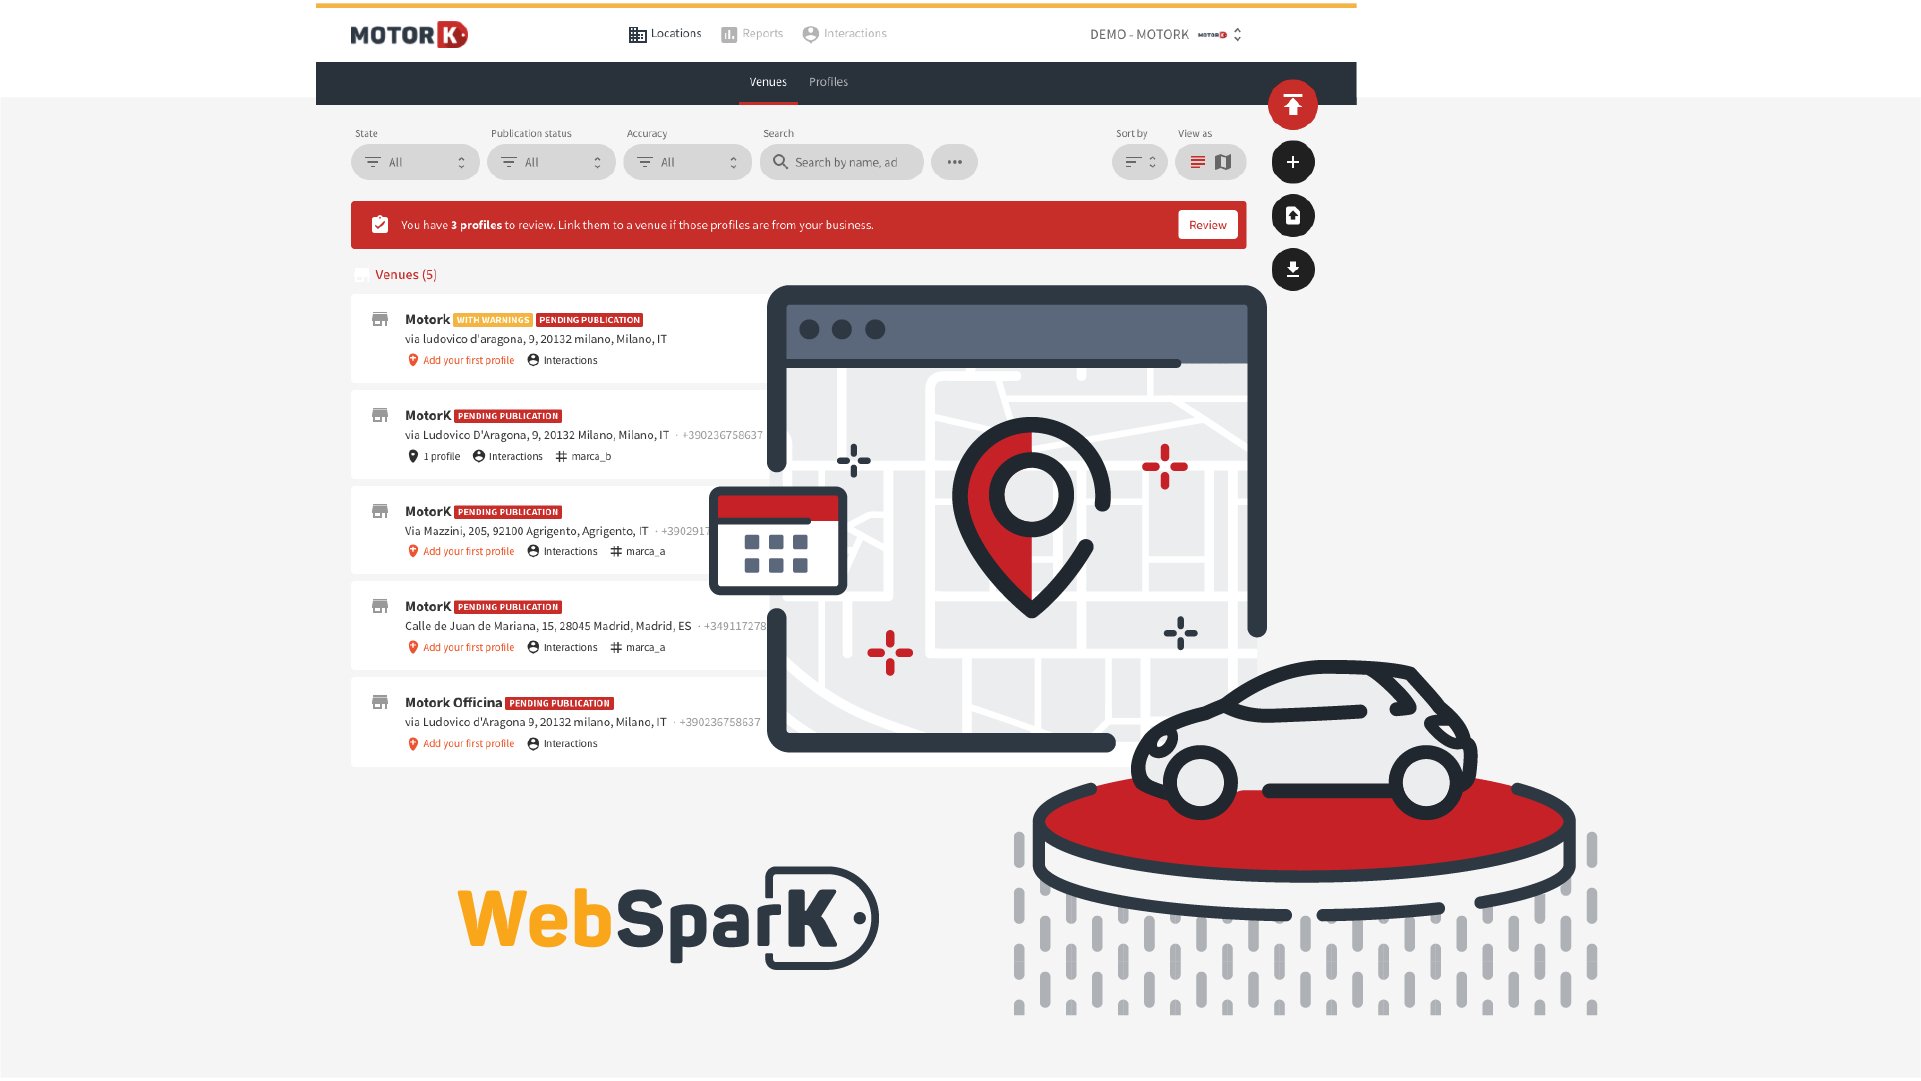 WebSparK local supports car dealer in Local Marketing activities